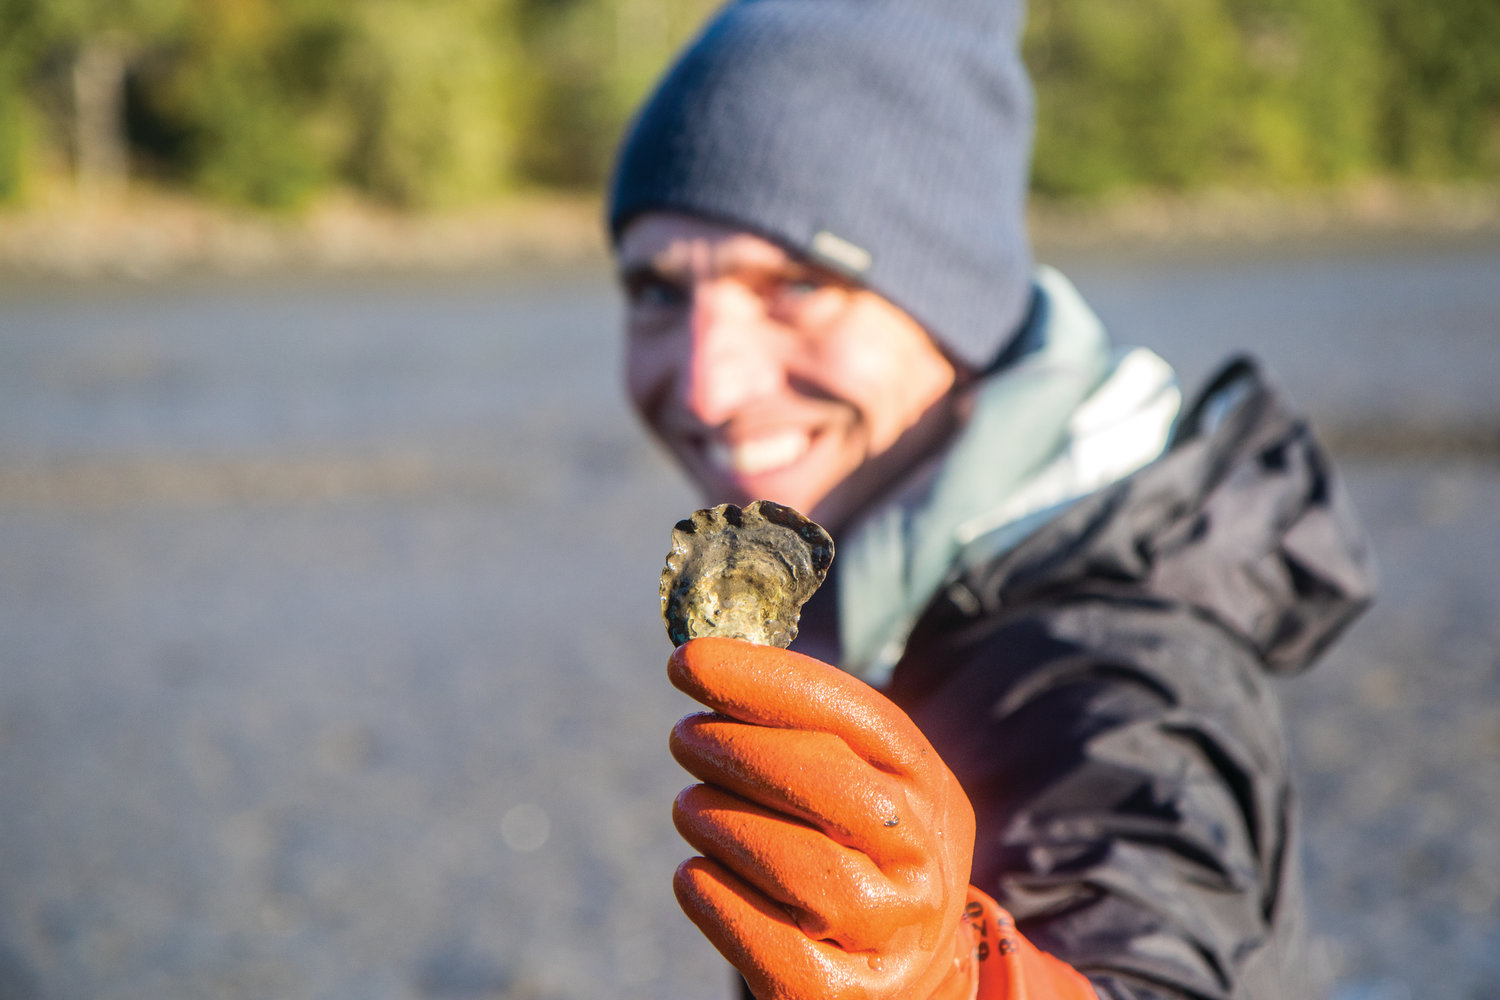 Environmental biologist Neil Harrington holds up an Olympia oyster. Smaller in size than the Pacific oyster that is found on dinner tables across the Pacific Northwest, the Olympia oyster is the only oyster that is native to this area.